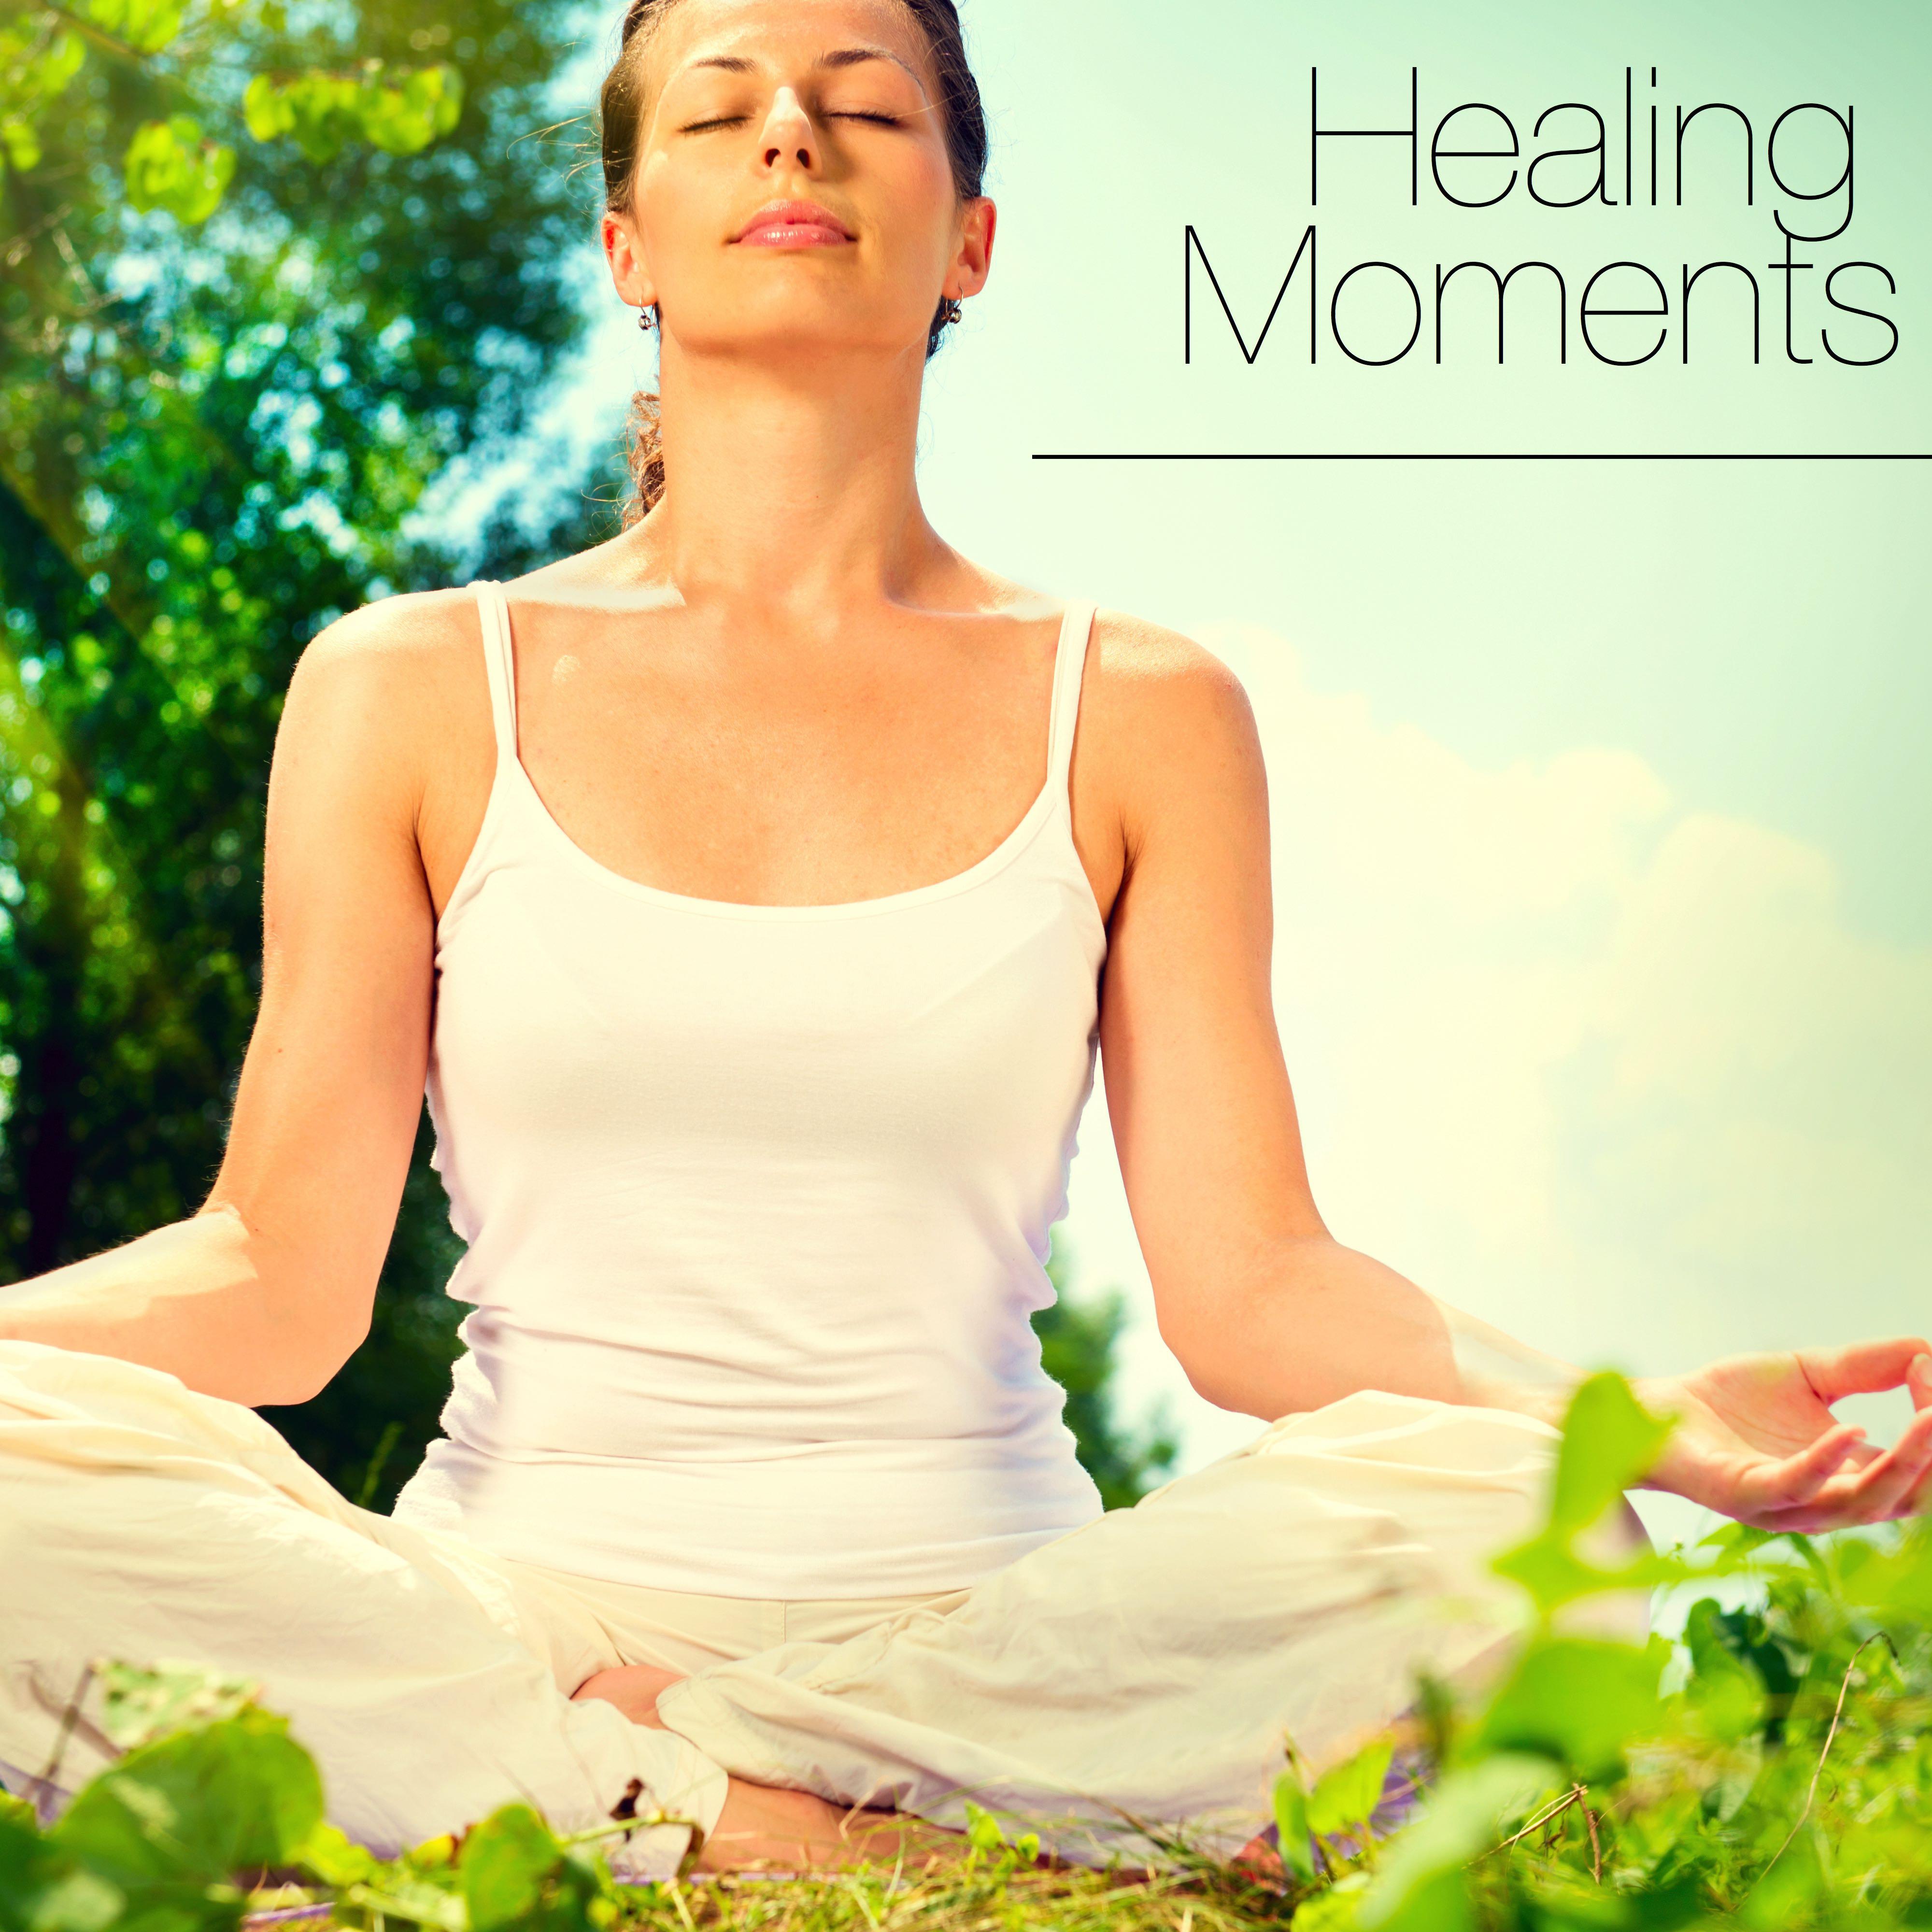 Healing Moments  Flute and Piano Music for Yoga, Massage, Deep Meditation and Reiki Therapy